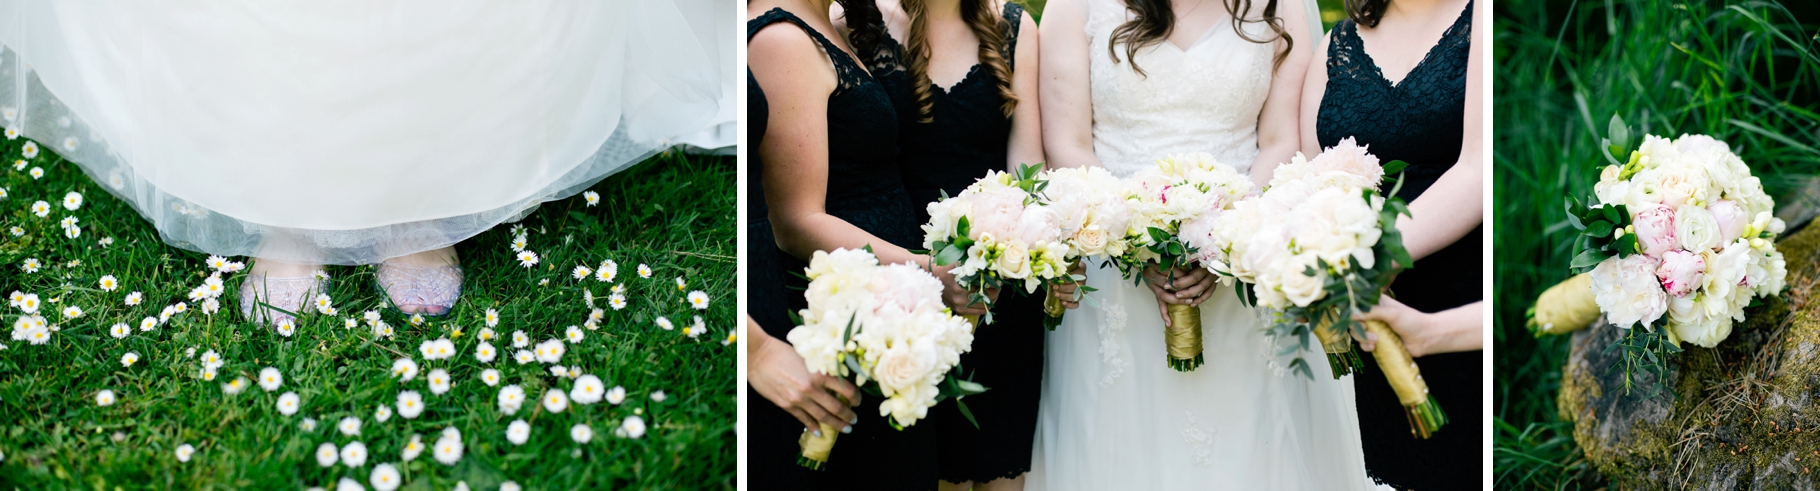 25-Bridal-Party-Florals-Brides-Shoes-Woodland-Park-Seattle-Wedding-Photographer-Photography-by-Betty-Elaine